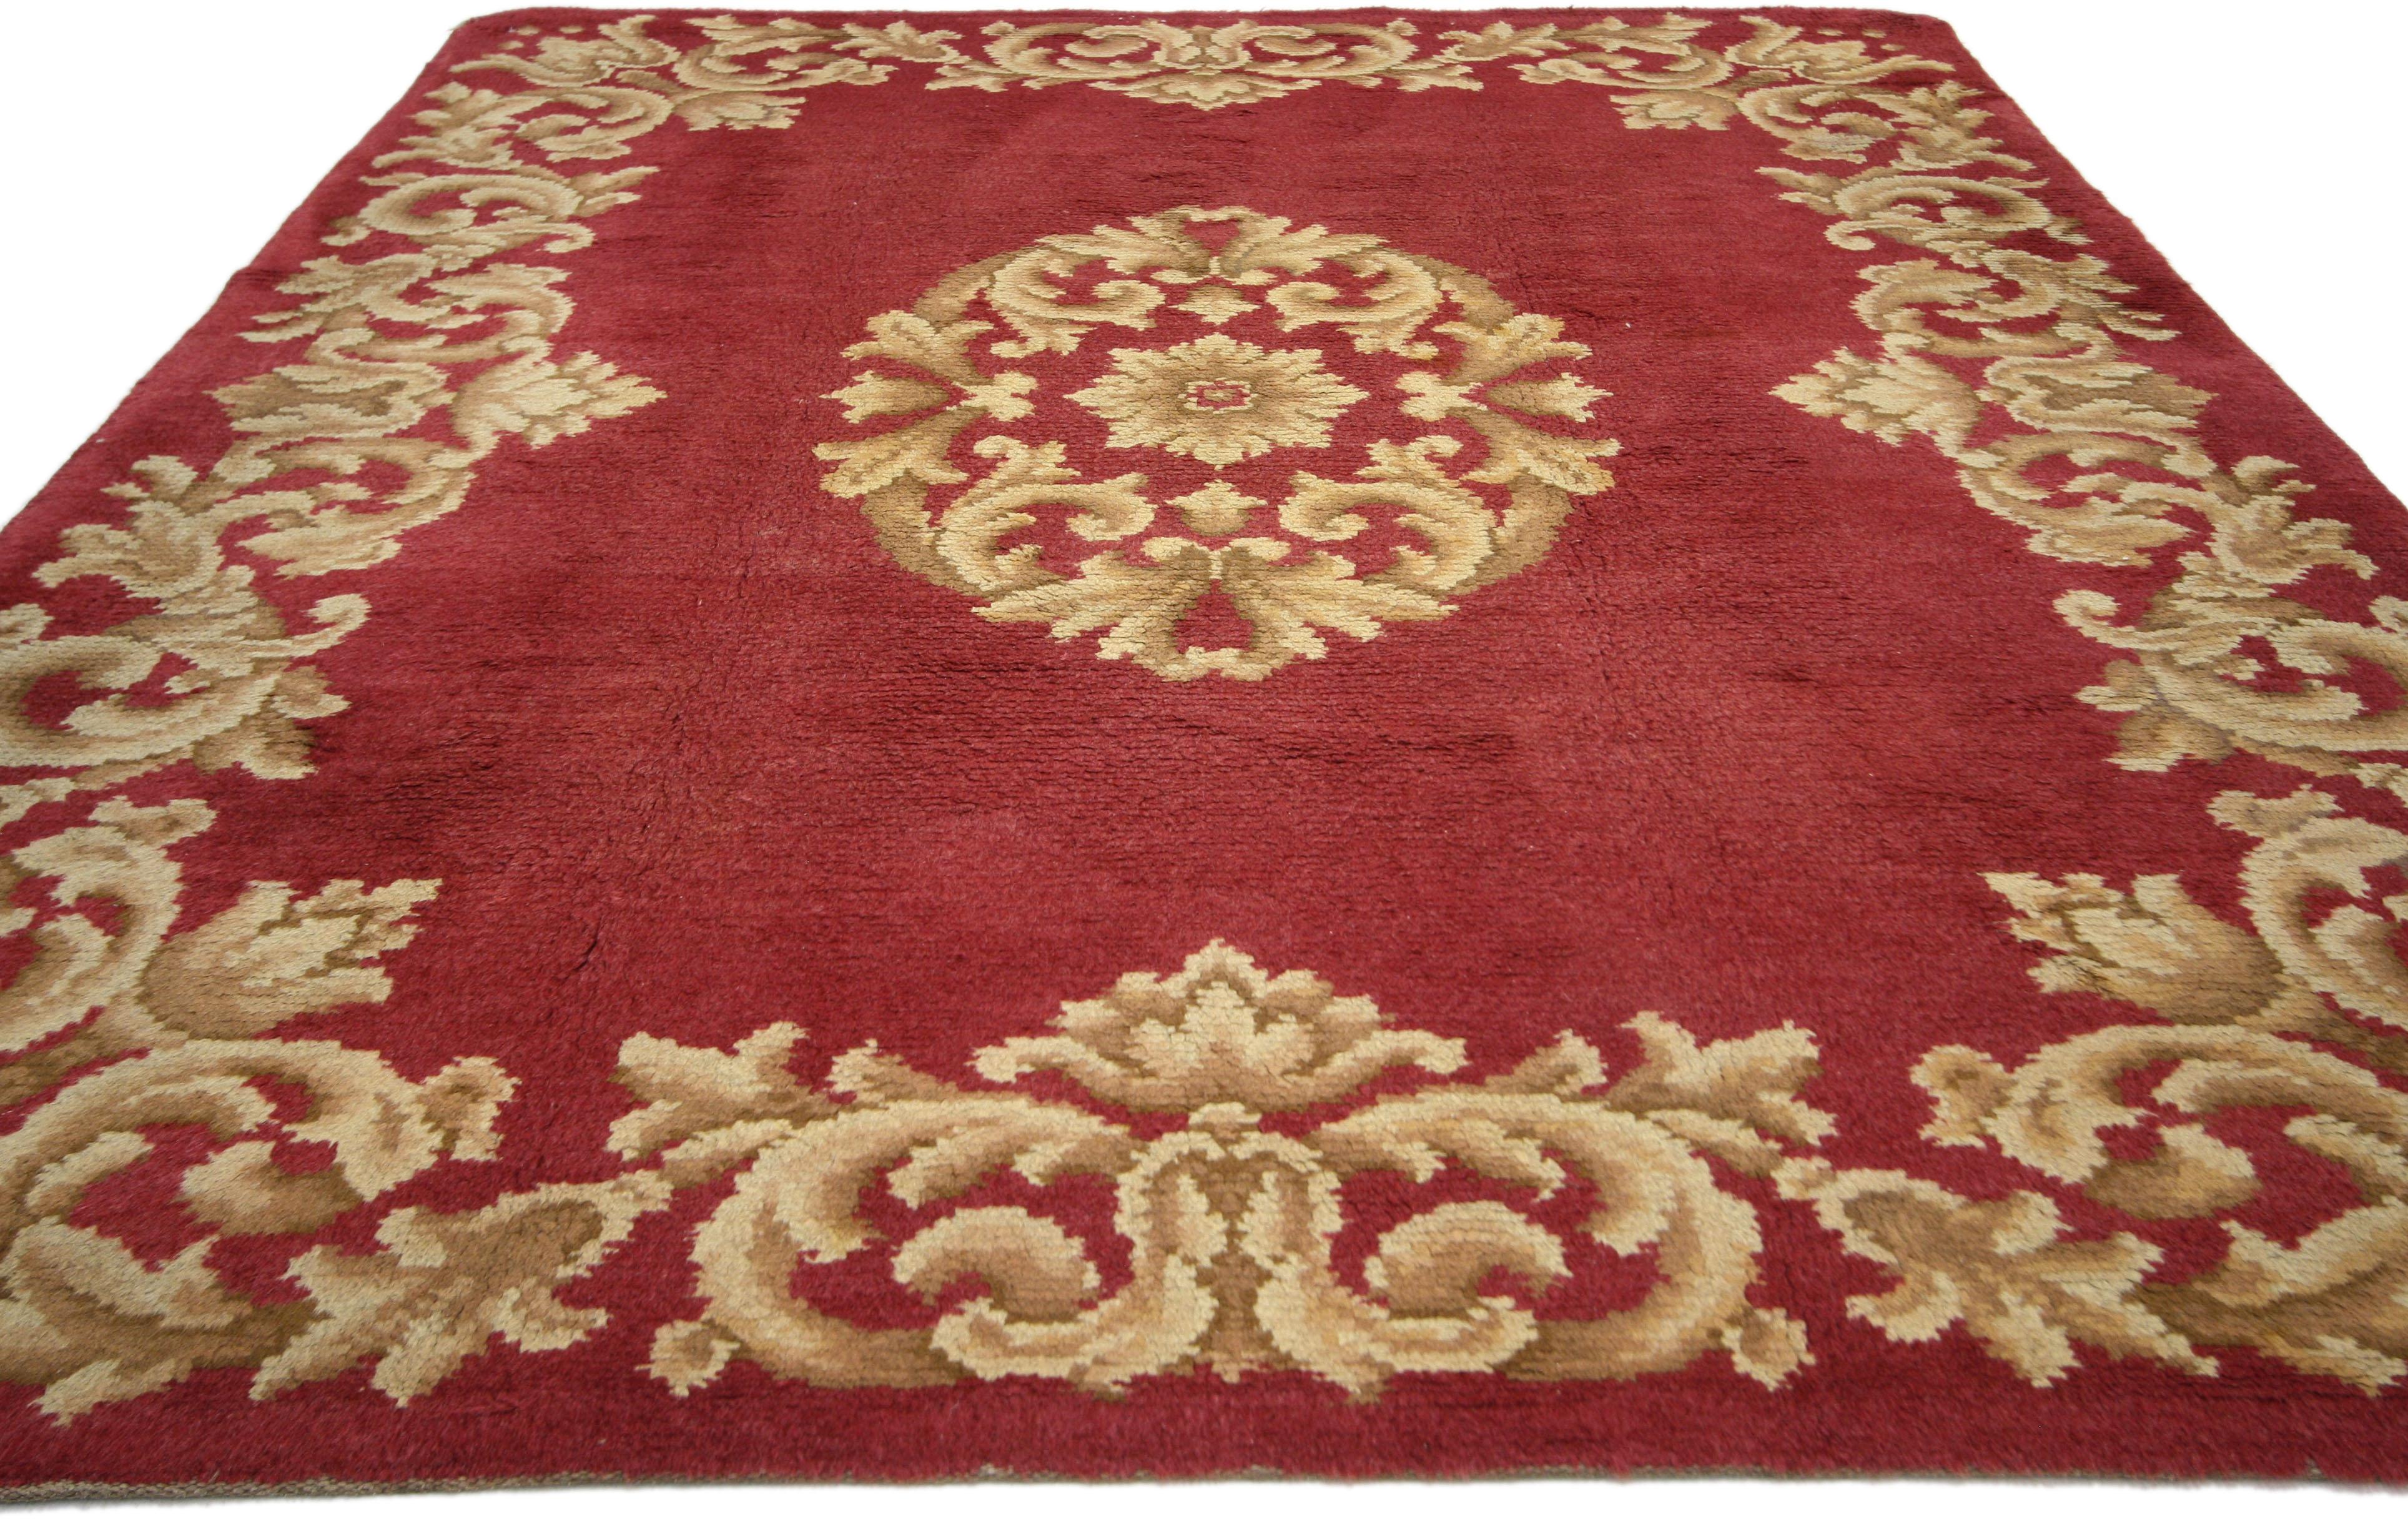 73073, vintage Spanish Savonnerie with Rococo style. Fit for a regal interior, this vintage Spanish Savonnerie carpet captivates with its bright red and golden hues and trompe l'oeil effect. On a ruby red backdrop, light colored scroll-work creates